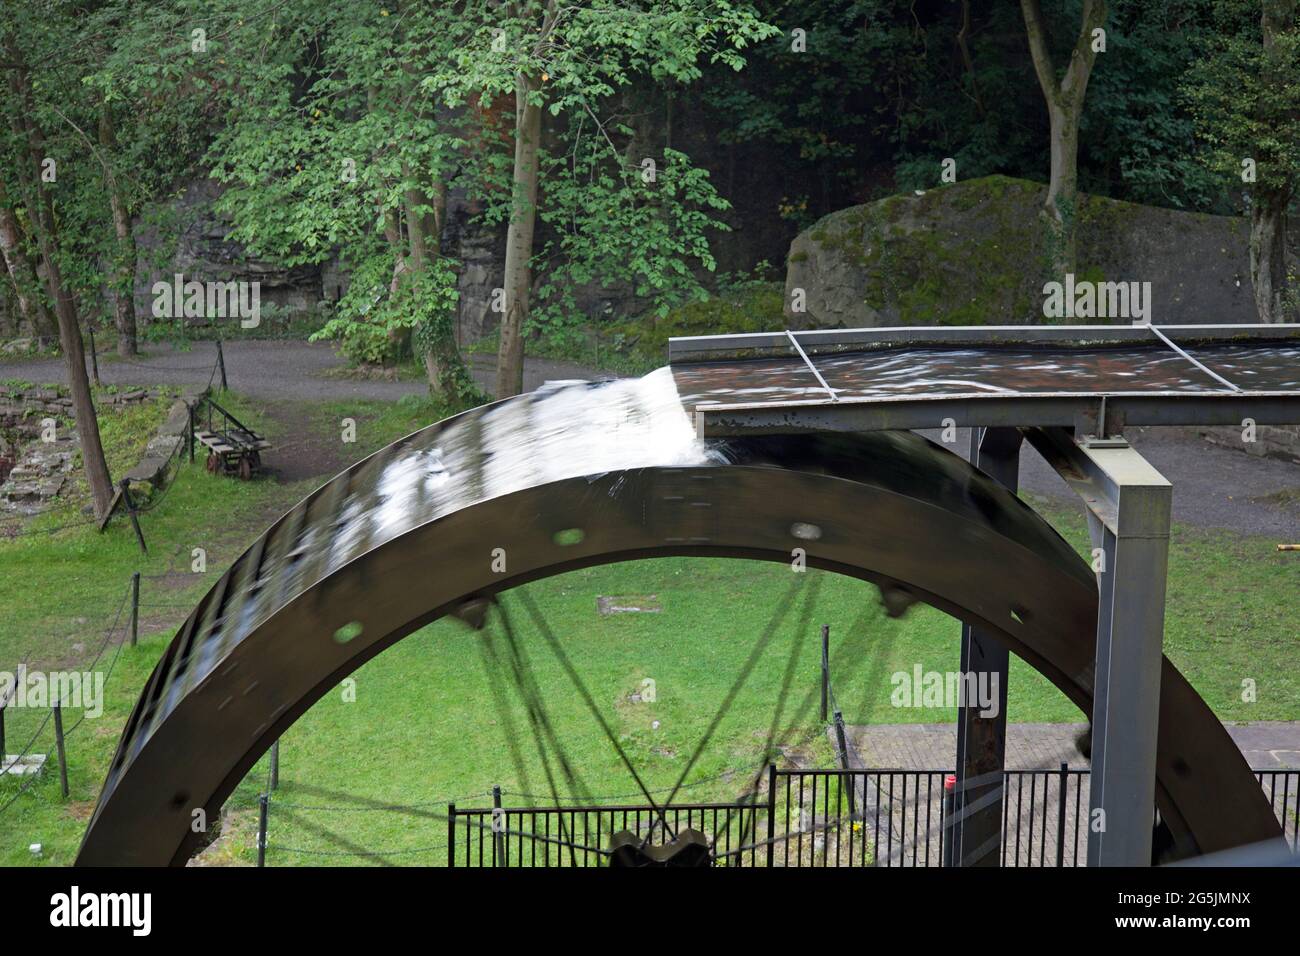 Water wheel at Aberdulais, Neath, Wales. Timed, long exposure, showing the wheel in operation Stock Photo